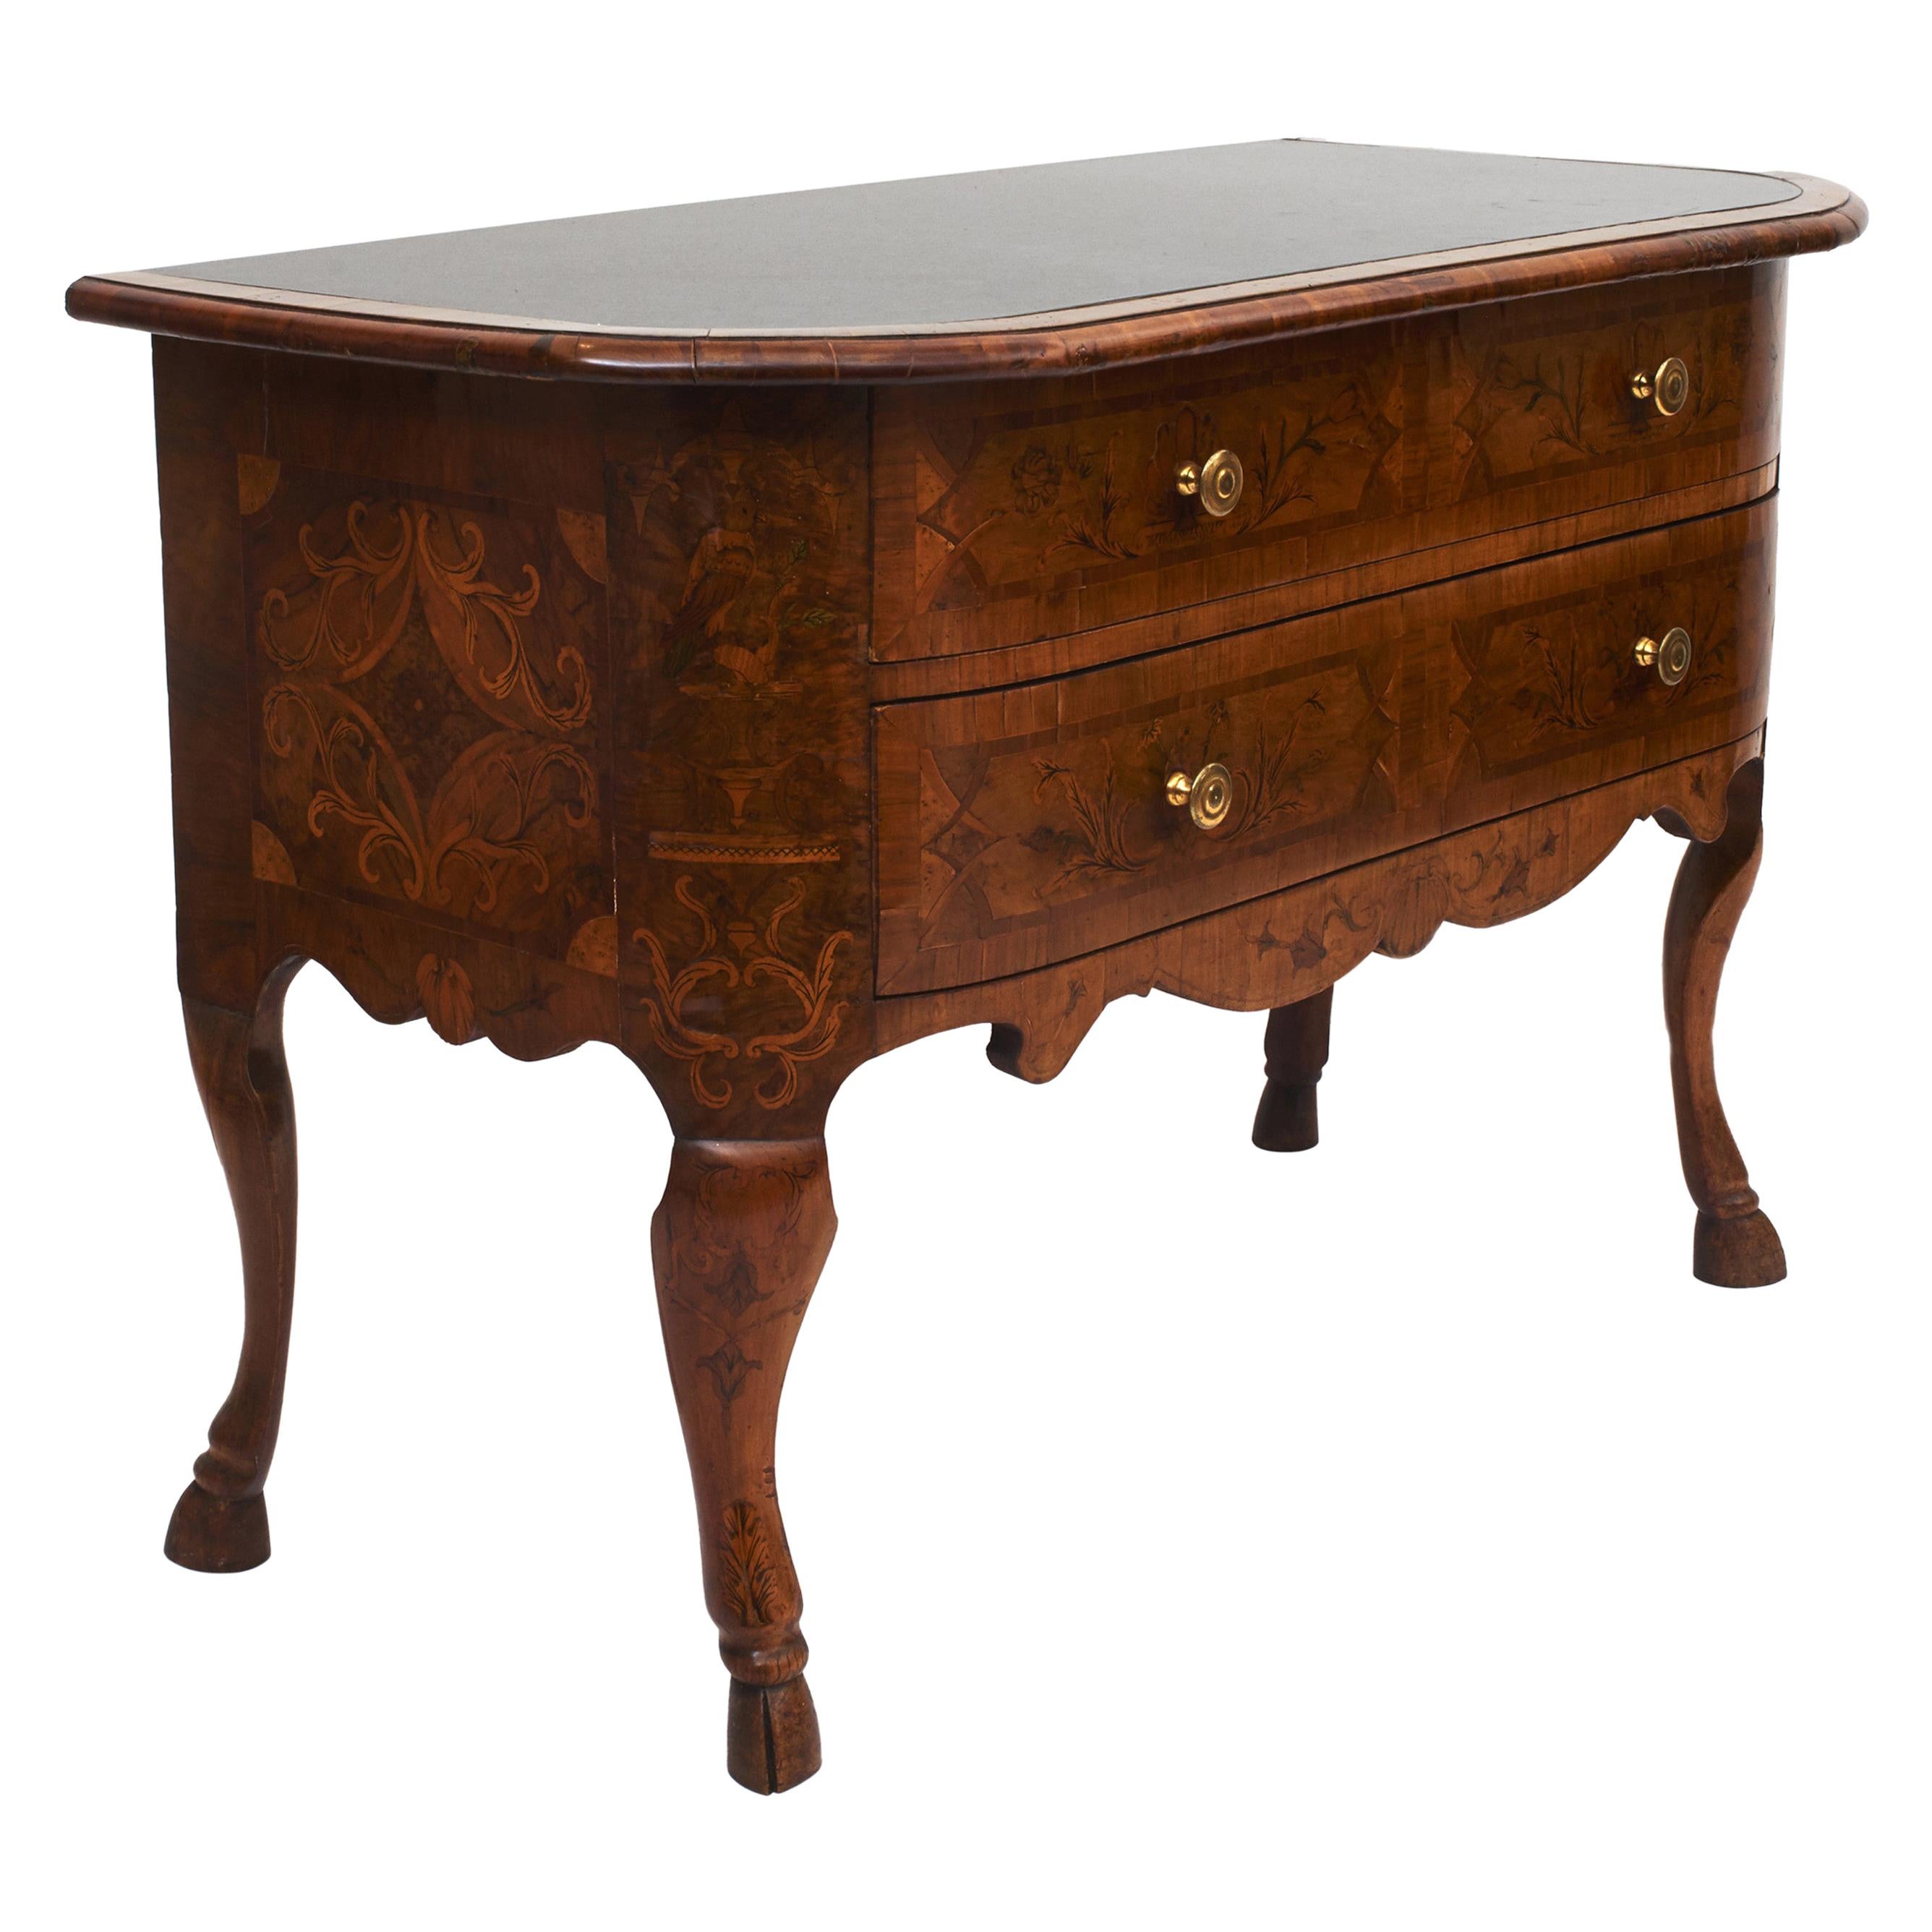 Baroque Chest of Drawers Walnut veneer with Marquetry Deco. Castle Furniture